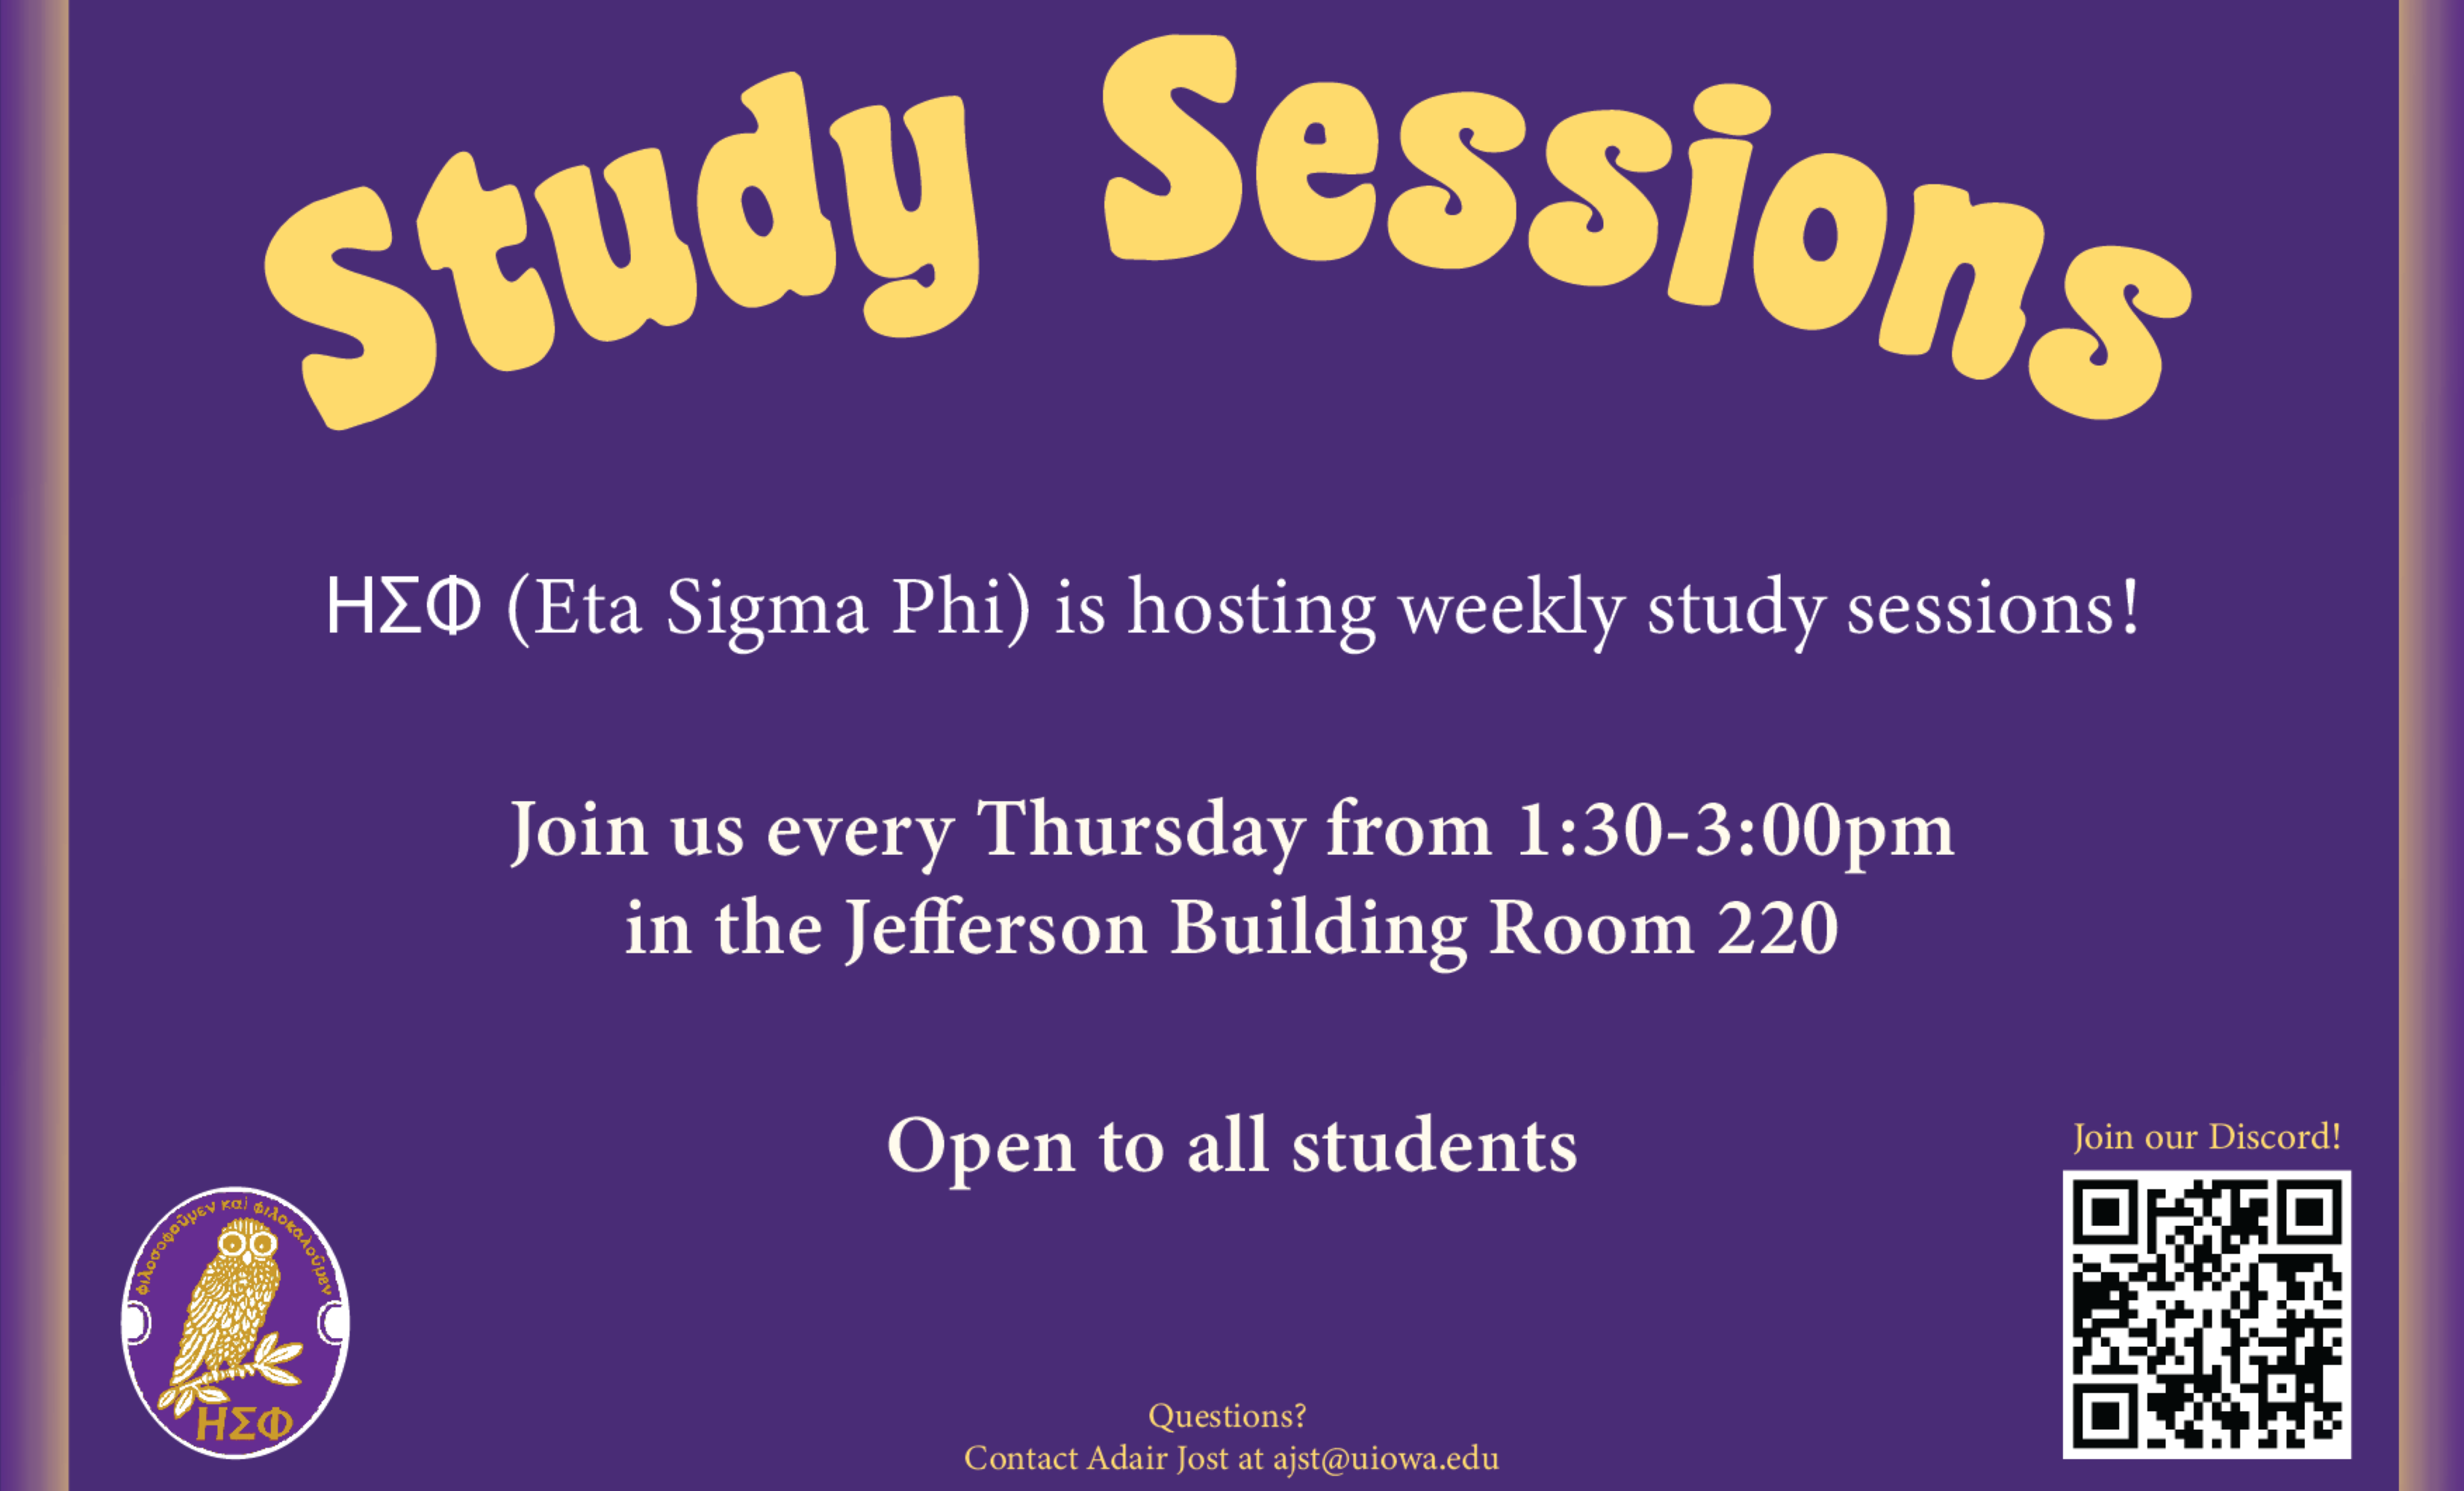 sign advertising ESP study sessions on Thursday afternoons